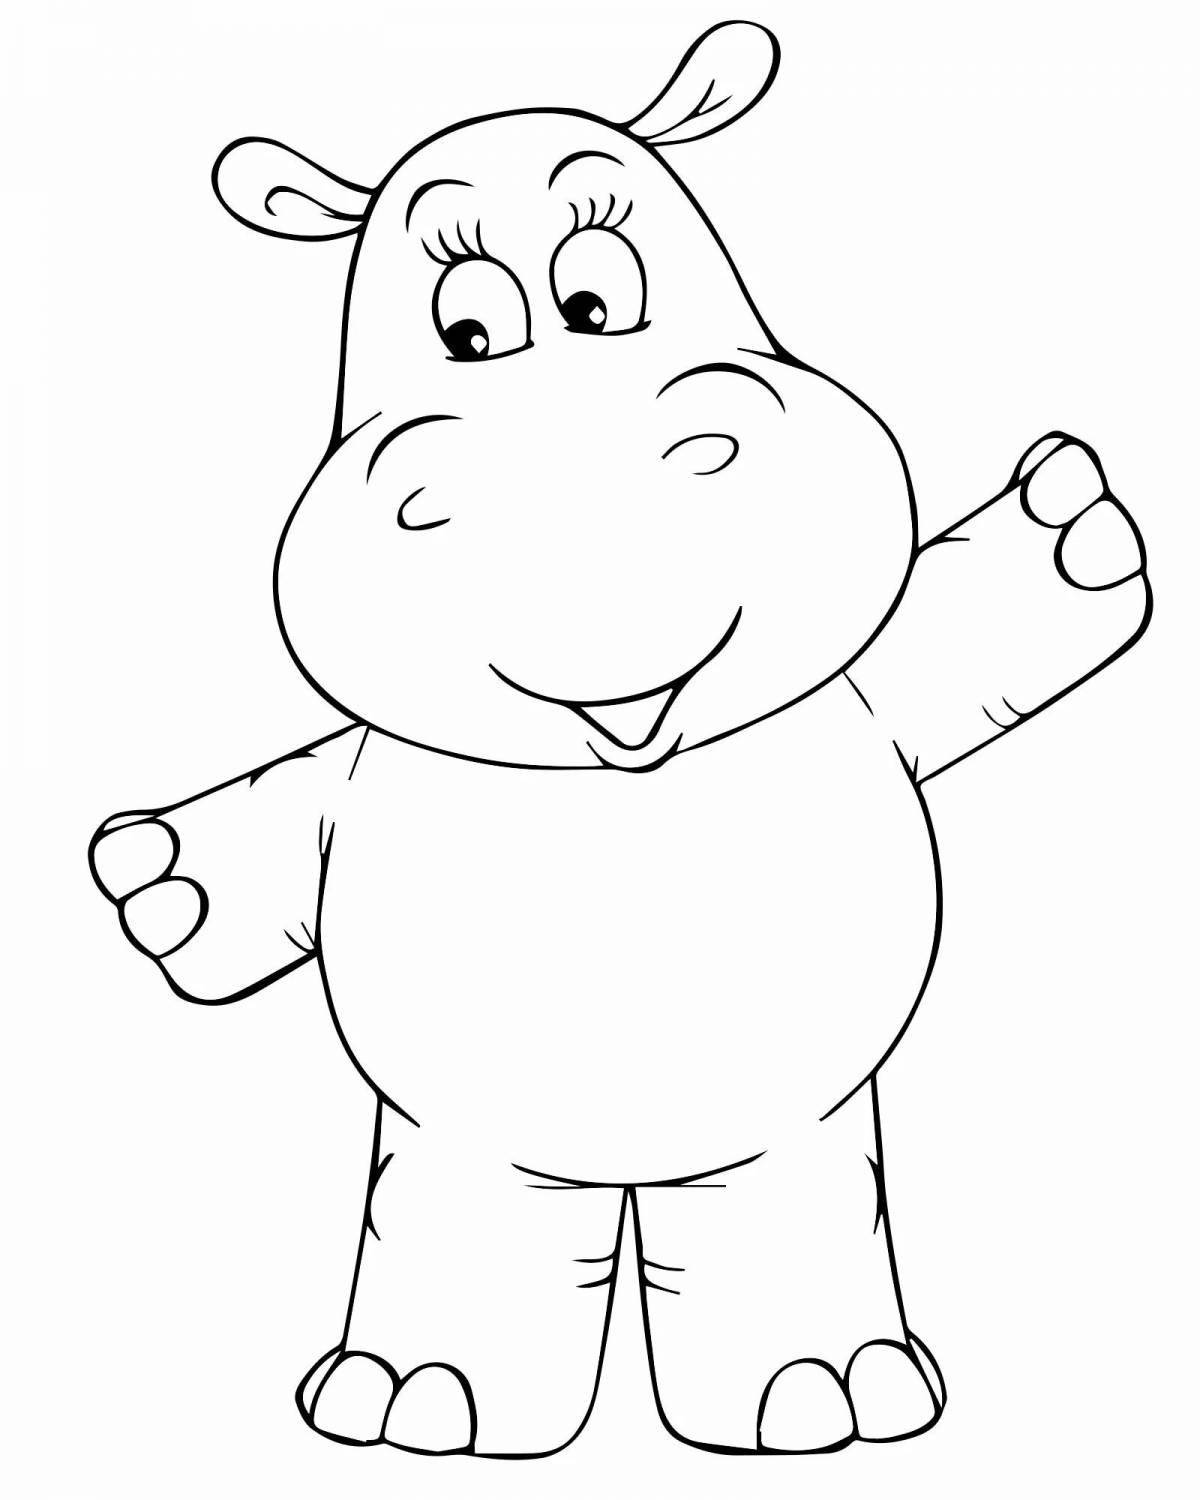 Fabulous hippo coloring book for kids